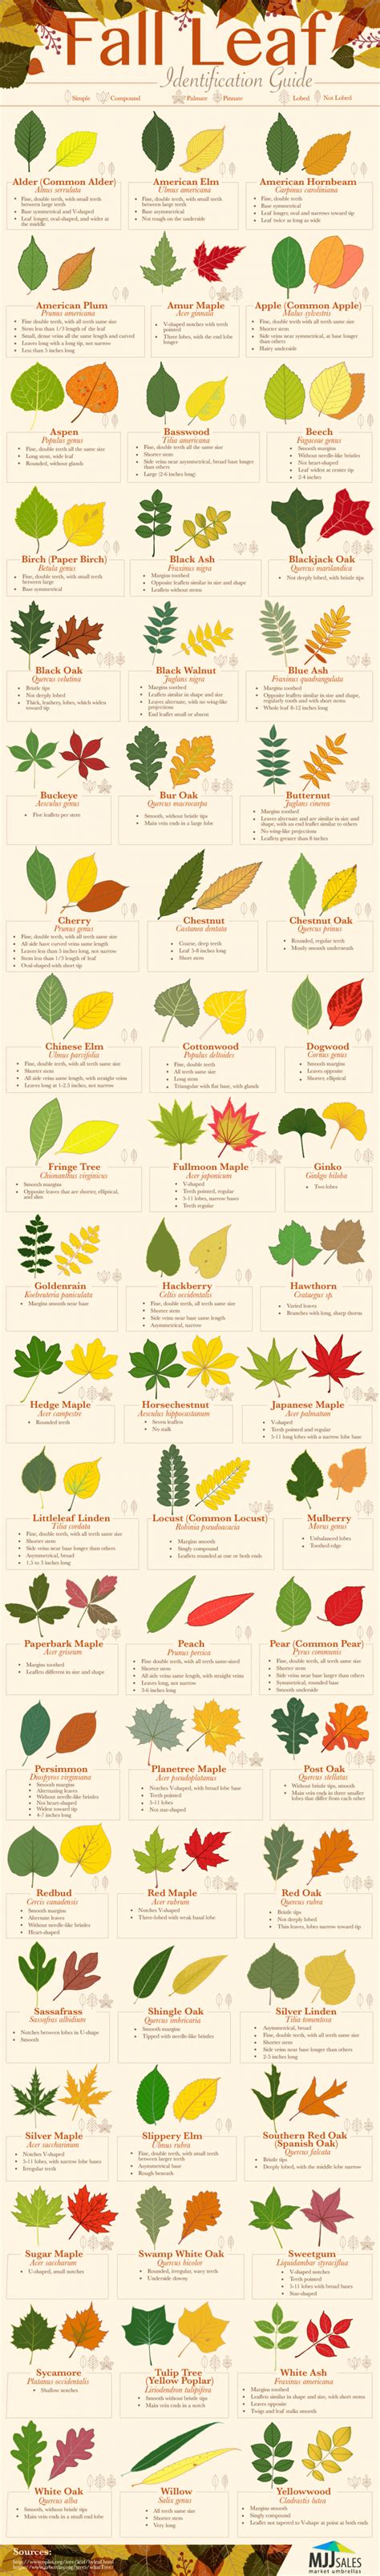 Fall Leaf Identification Guide Daily Infographic Cuisine Recette